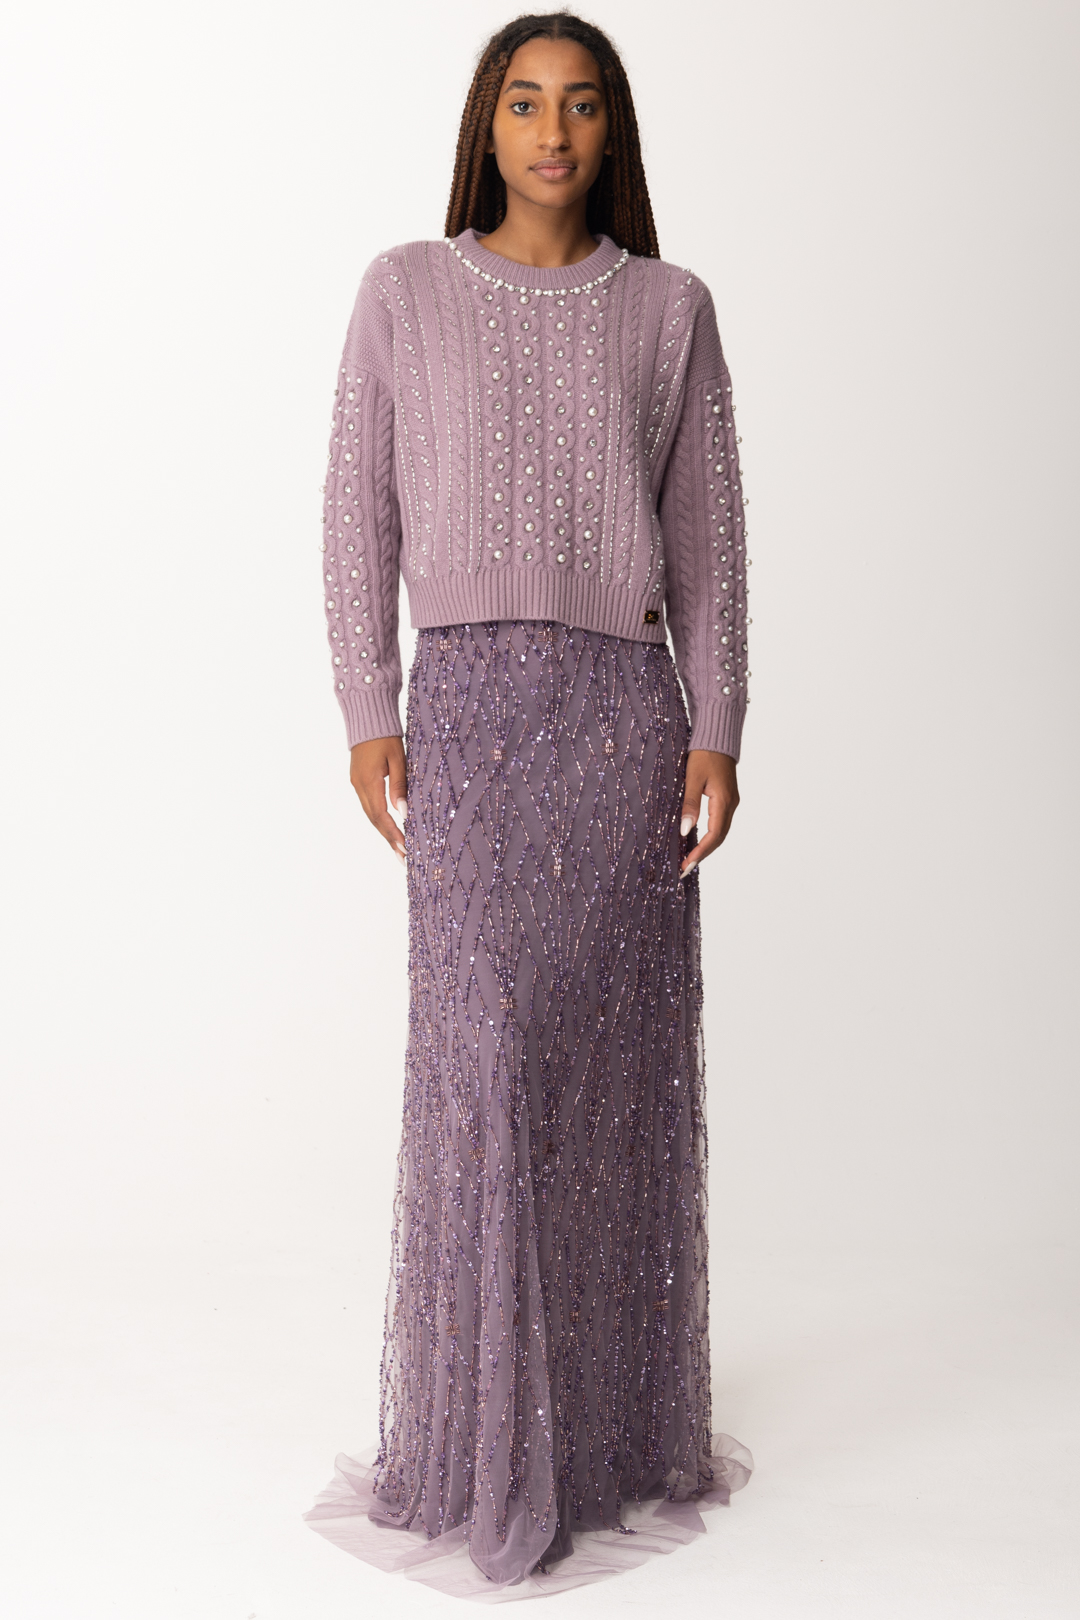 Preview: Elisabetta Franchi Wool sweater with pearls embroidery CANDY VIOLET